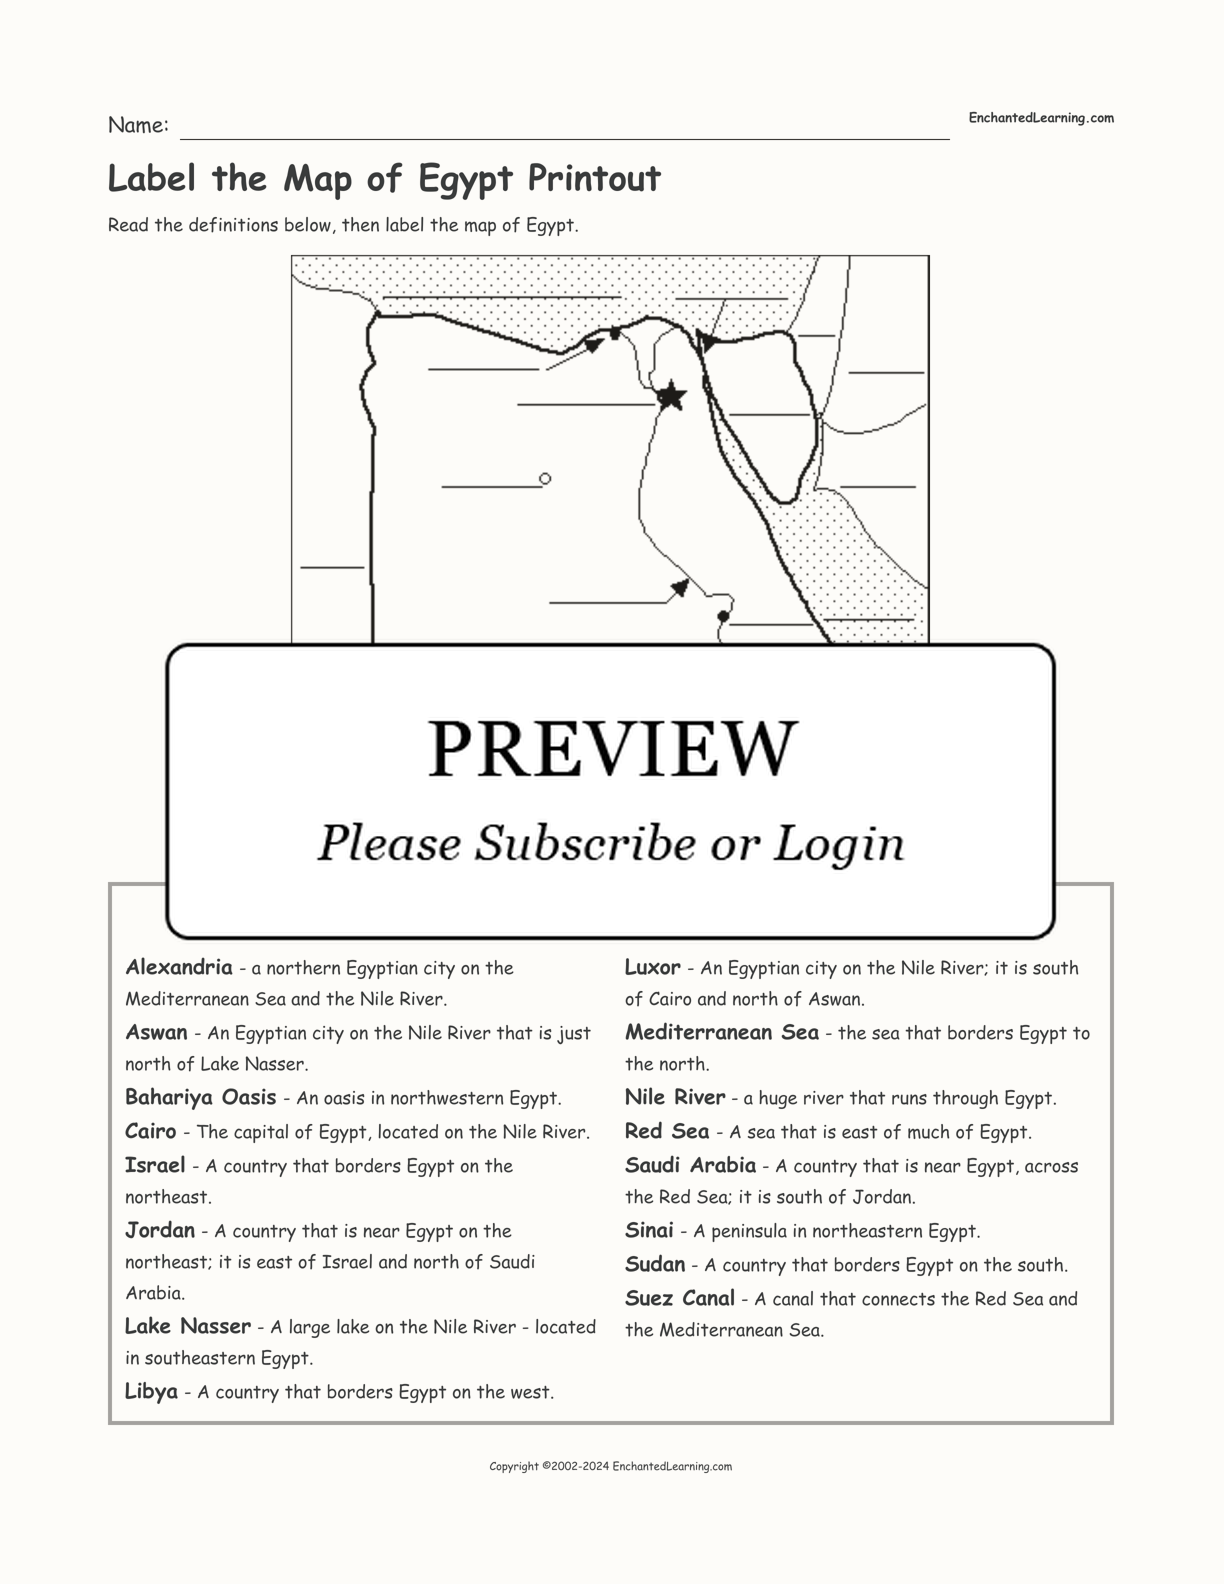 Label the Map of Egypt Printout interactive worksheet page 1